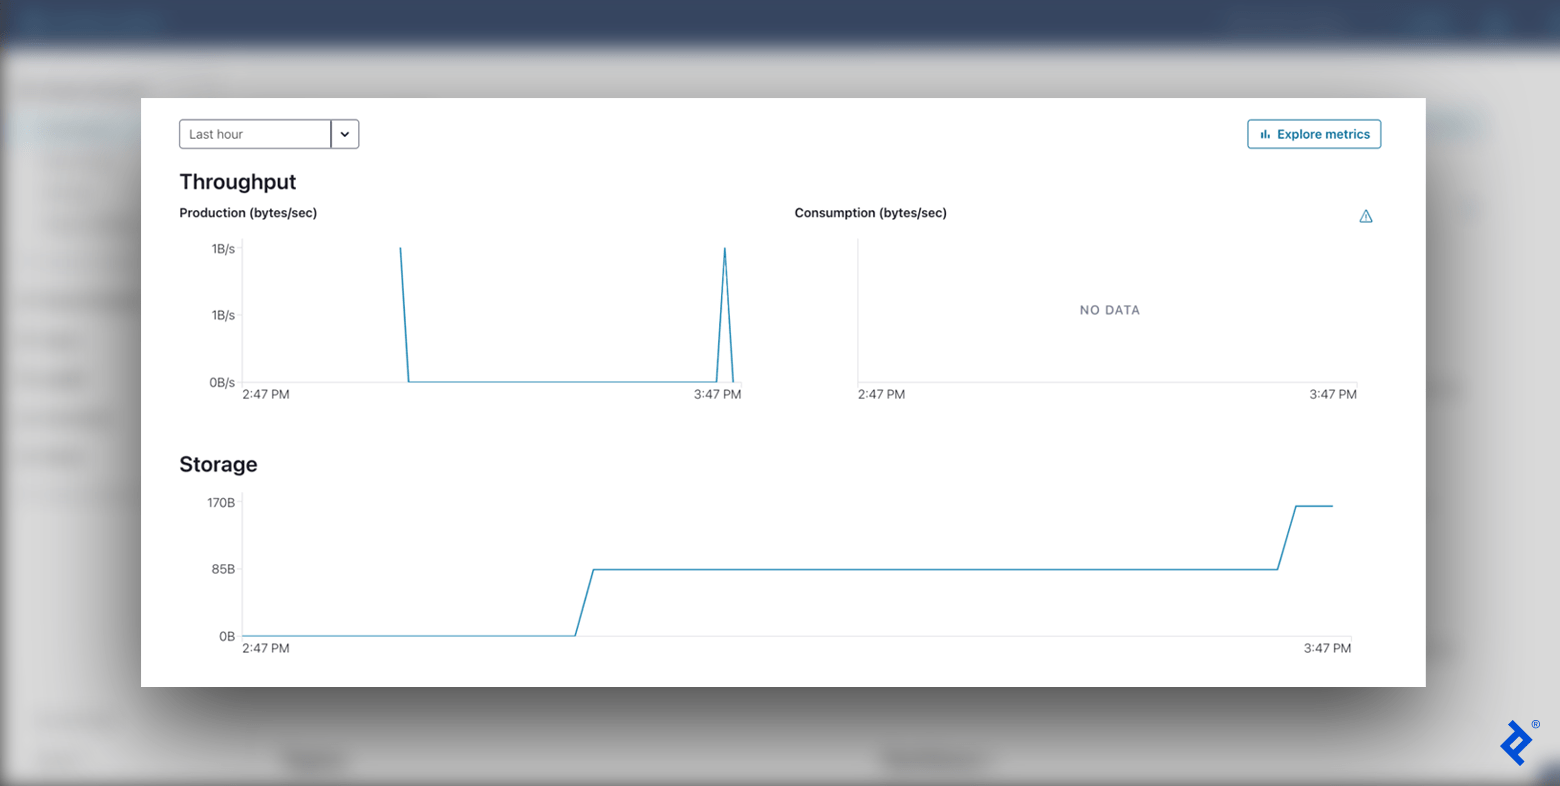 Confluent’s Cluster Overview dashboard: Production shows two spikes, Storage shows two steps (with horizontal lines), and Consumption shows no data.